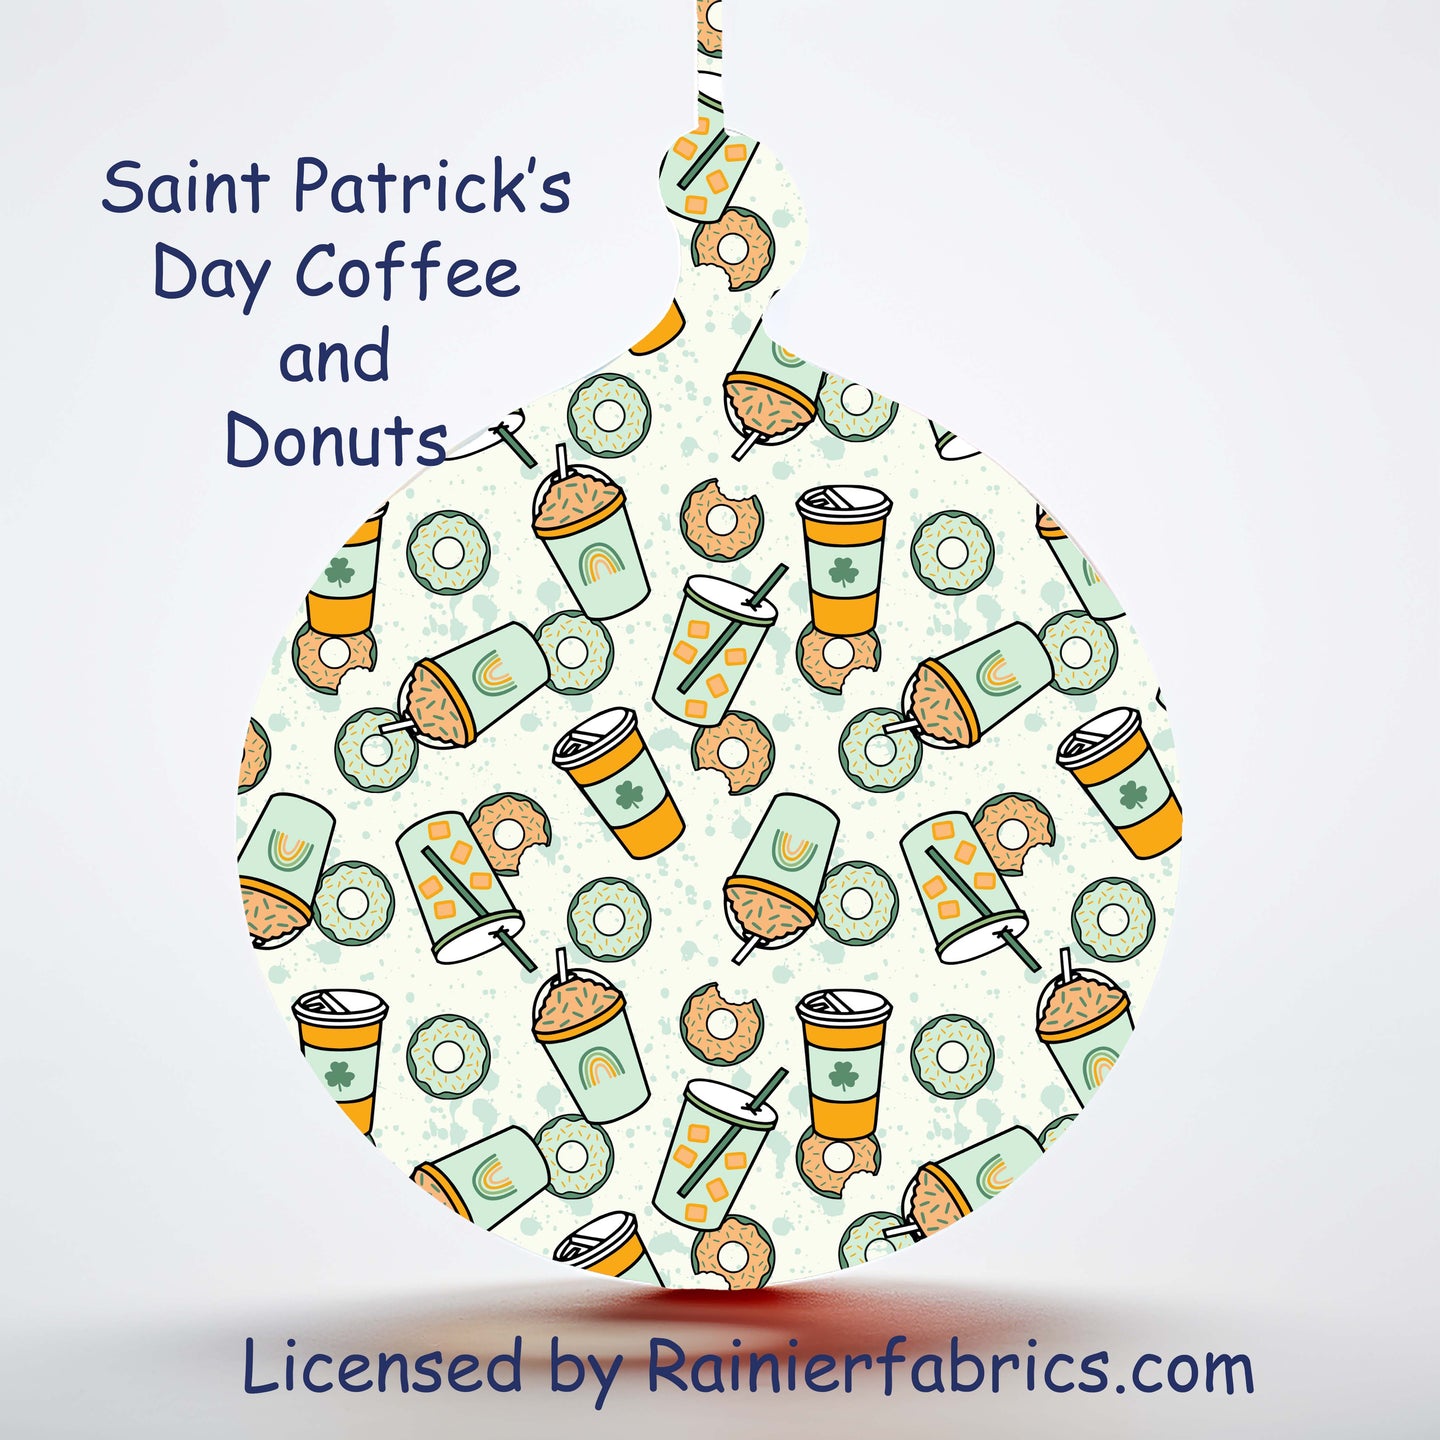 Saint Patrick’s Day Coffee and Donuts